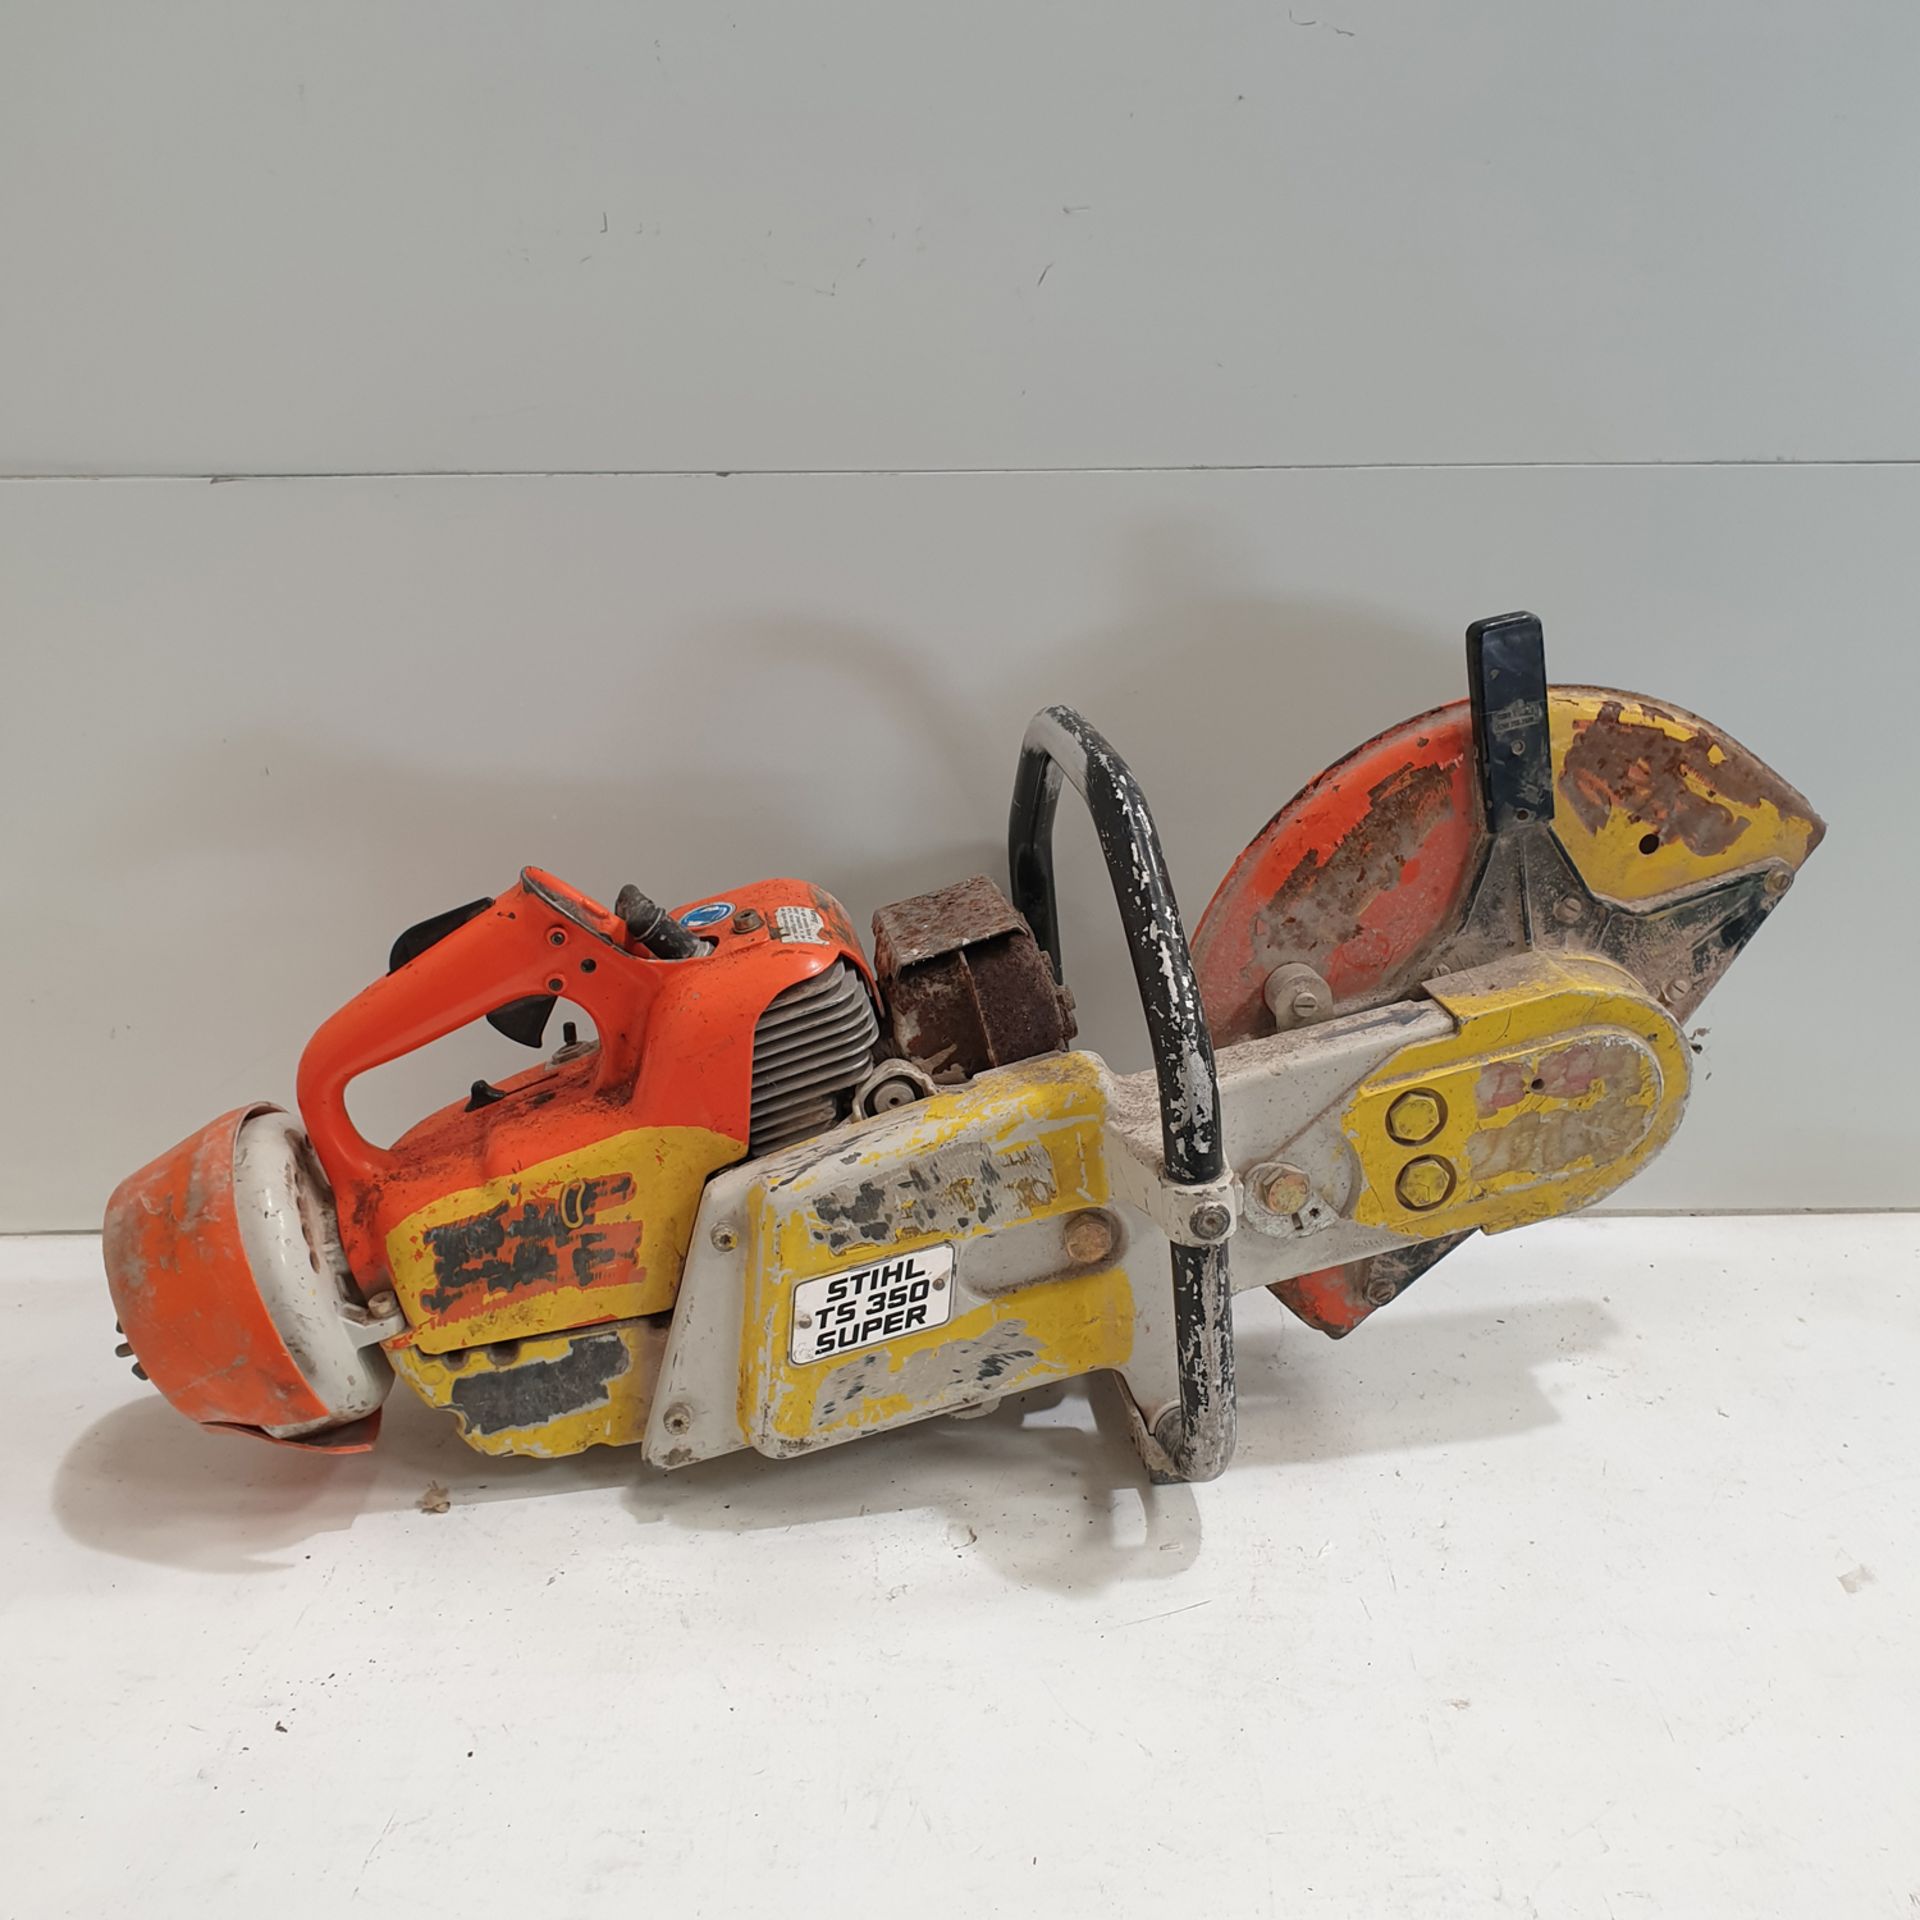 STIHL Saw Type TS 350 SUPER. Please Note This Item is for Spares or Repairs. - Image 3 of 3